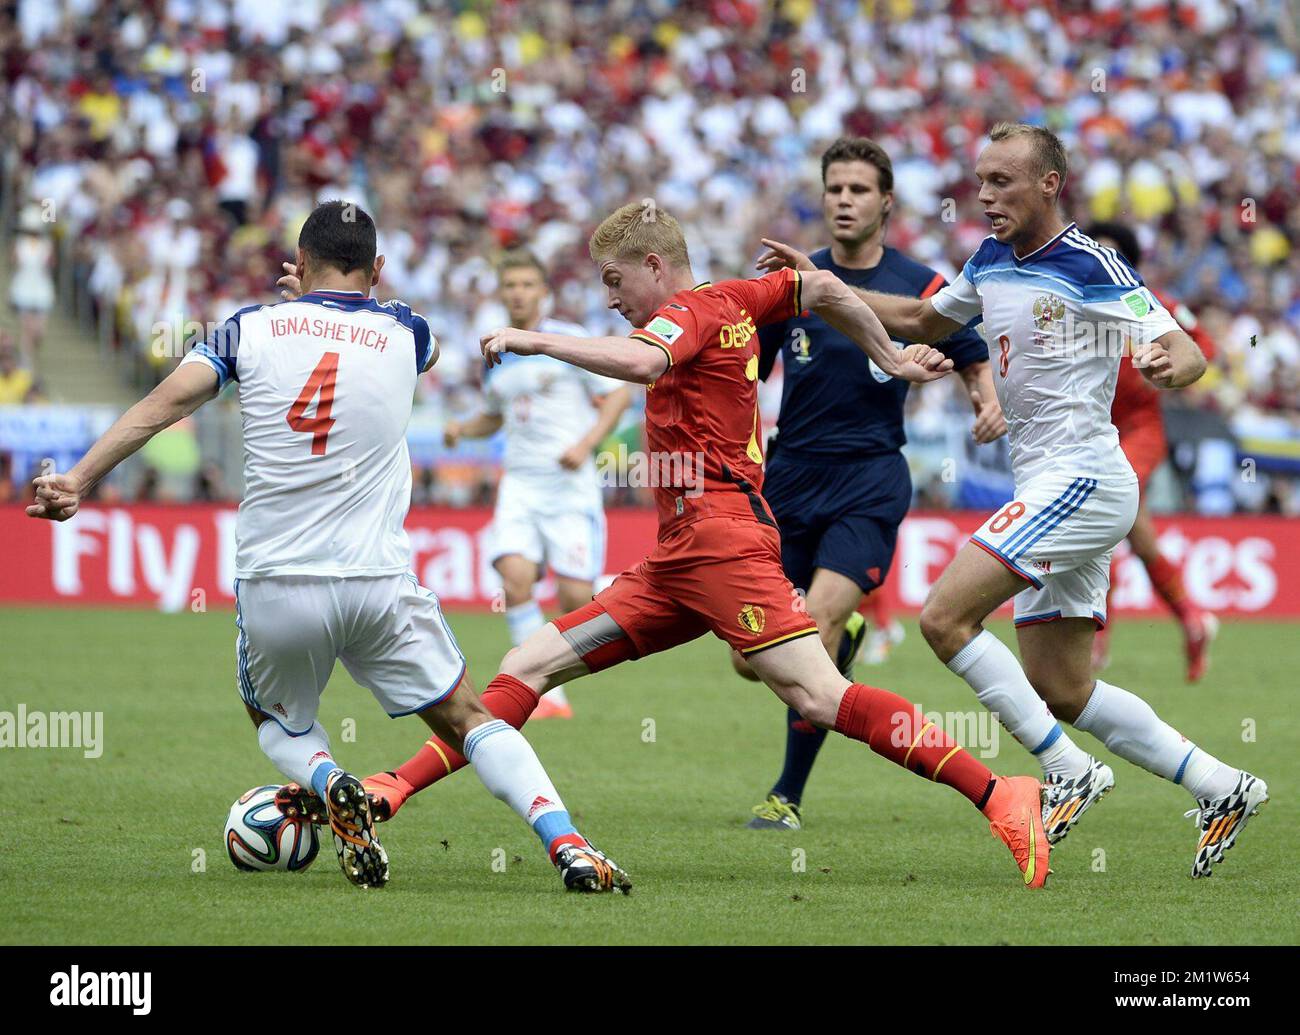 20140622 - RIO DE JANEIRO, BRAZIL: Russia's Sergei Ignashevich, Belgium's Kevin De Bruyne and Russia's Denis Glushakov in action during a soccer game between Belgian national team The Red Devils and Russia in Rio de Janeiro, Brazil, the second game in Group H of the first round of the 2014 FIFA World Cup, Sunday 22 June 2014.   BELGA PHOTO DIRK WAEM Stock Photo